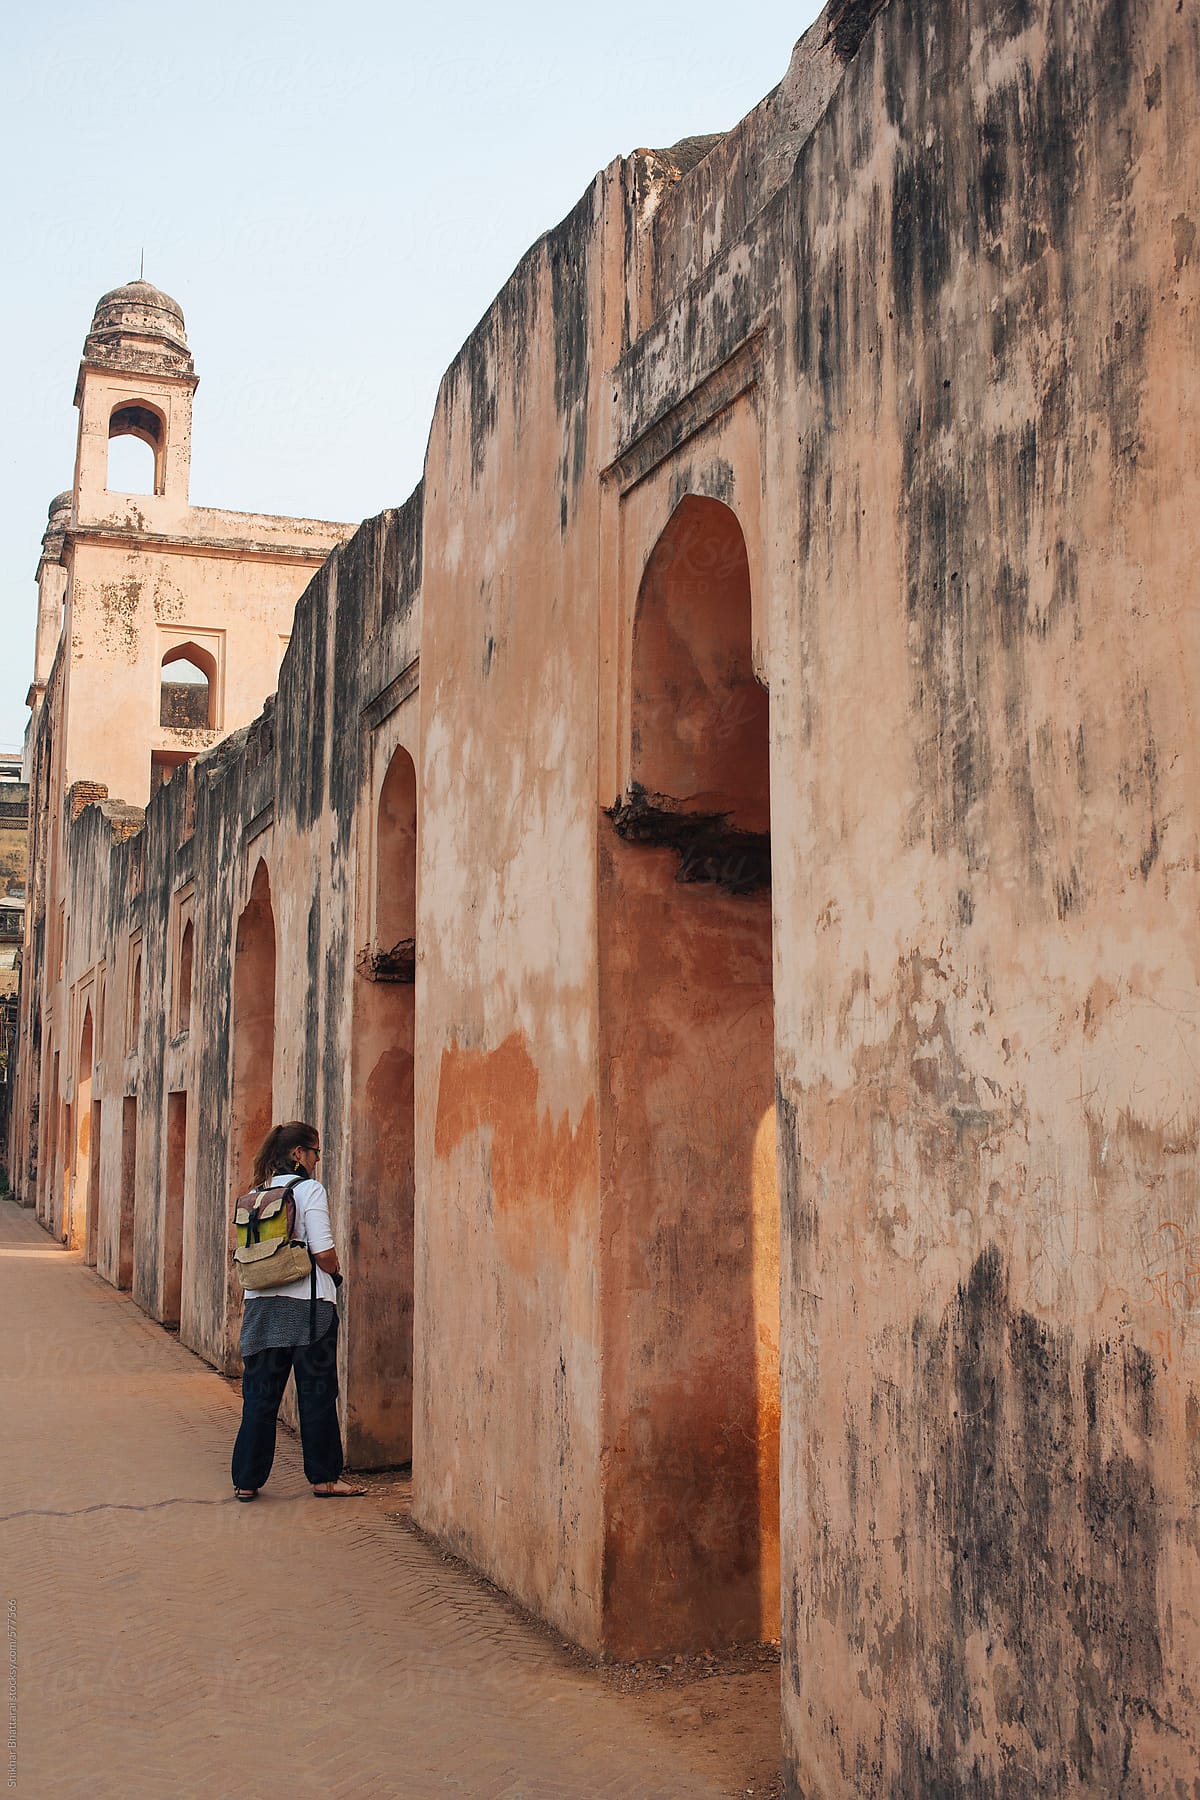 A young traveller walking by an old fort in Asia.